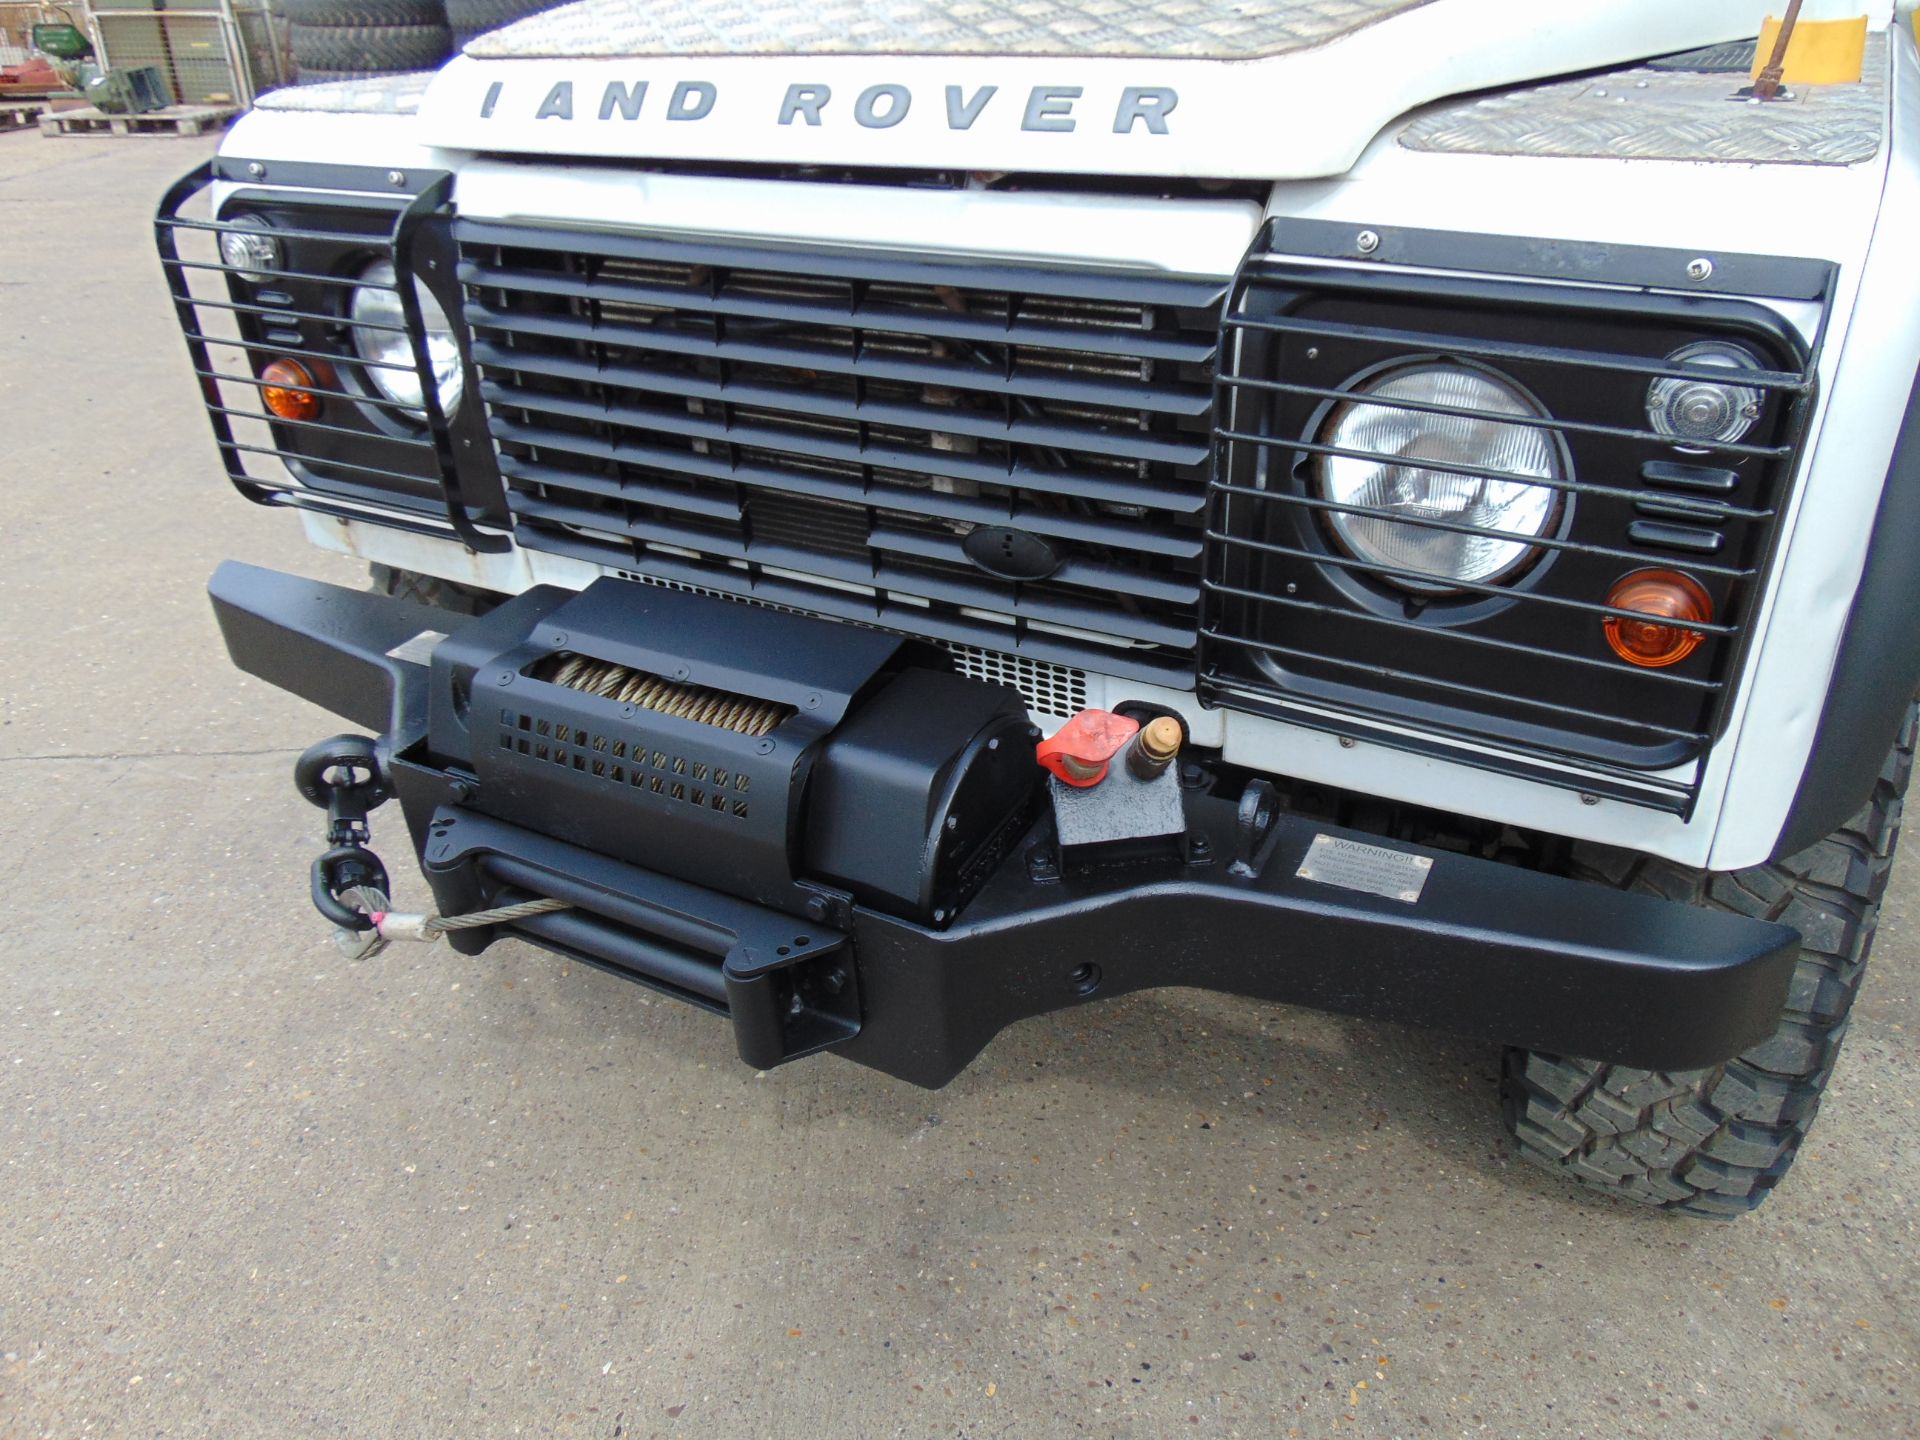 2013 Land Rover Defender 110 Puma hardtop 4x4 Utility vehicle (mobile workshop) with hydraulic winch - Image 23 of 44